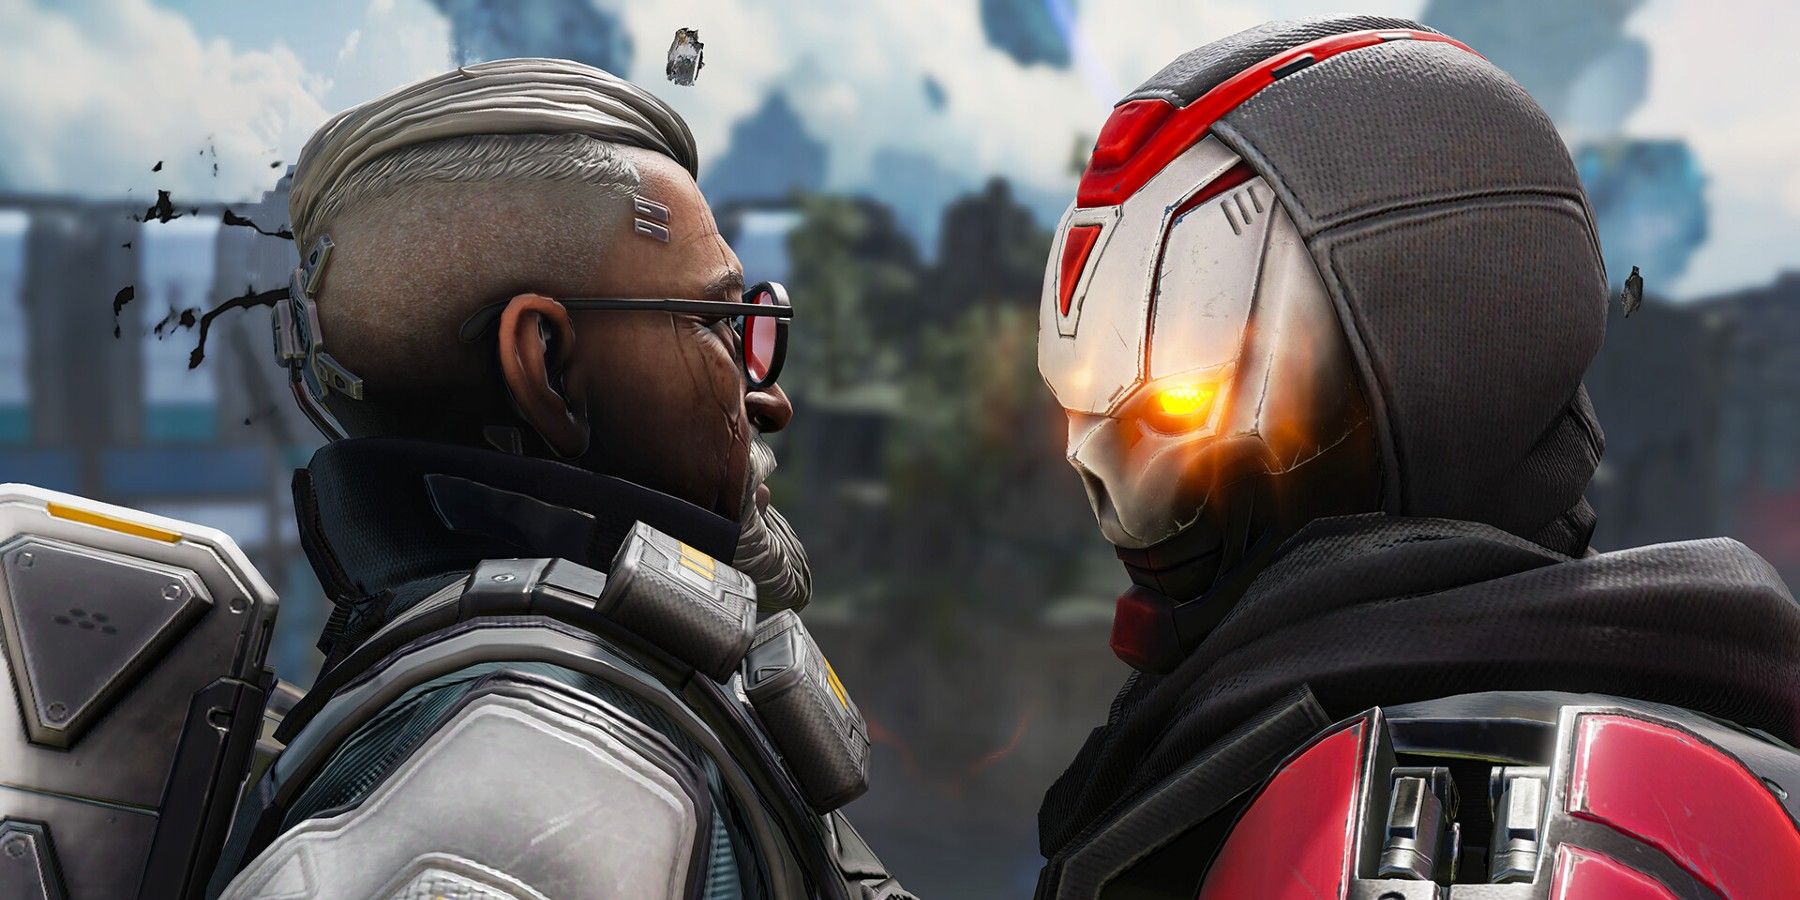 Apex Legends Makes Unexpected Change to One Character Not Mentioned in Patch Notes